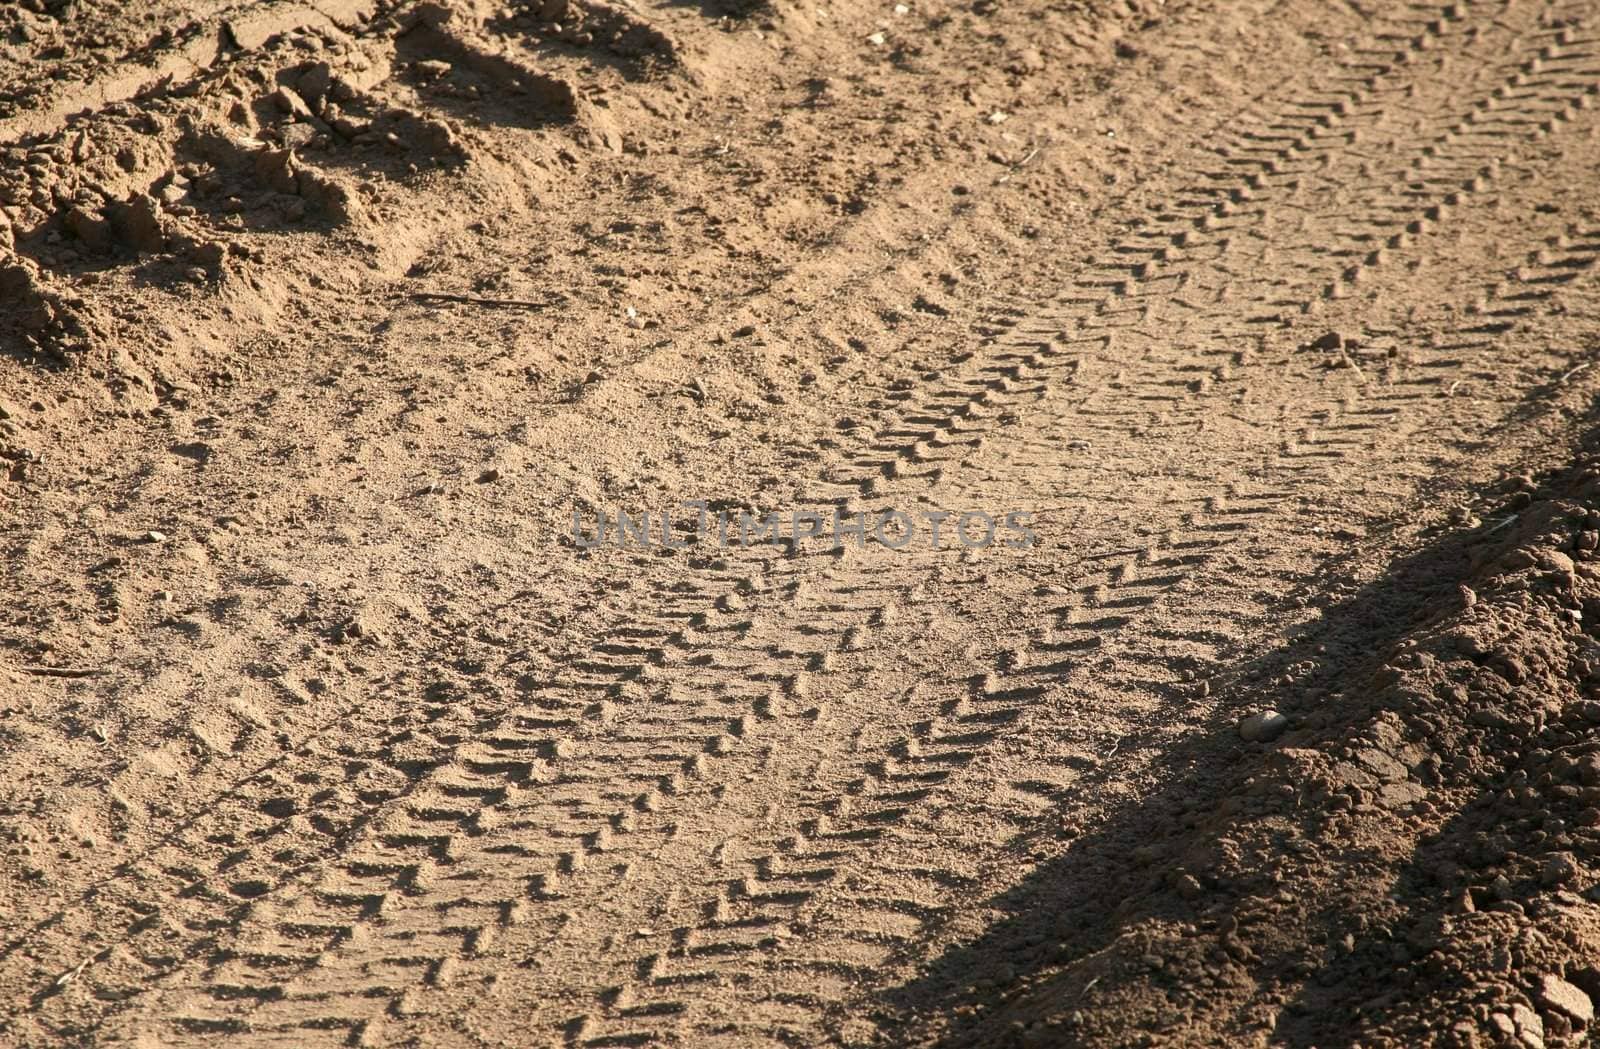 Dirt background with vehicle pattern track